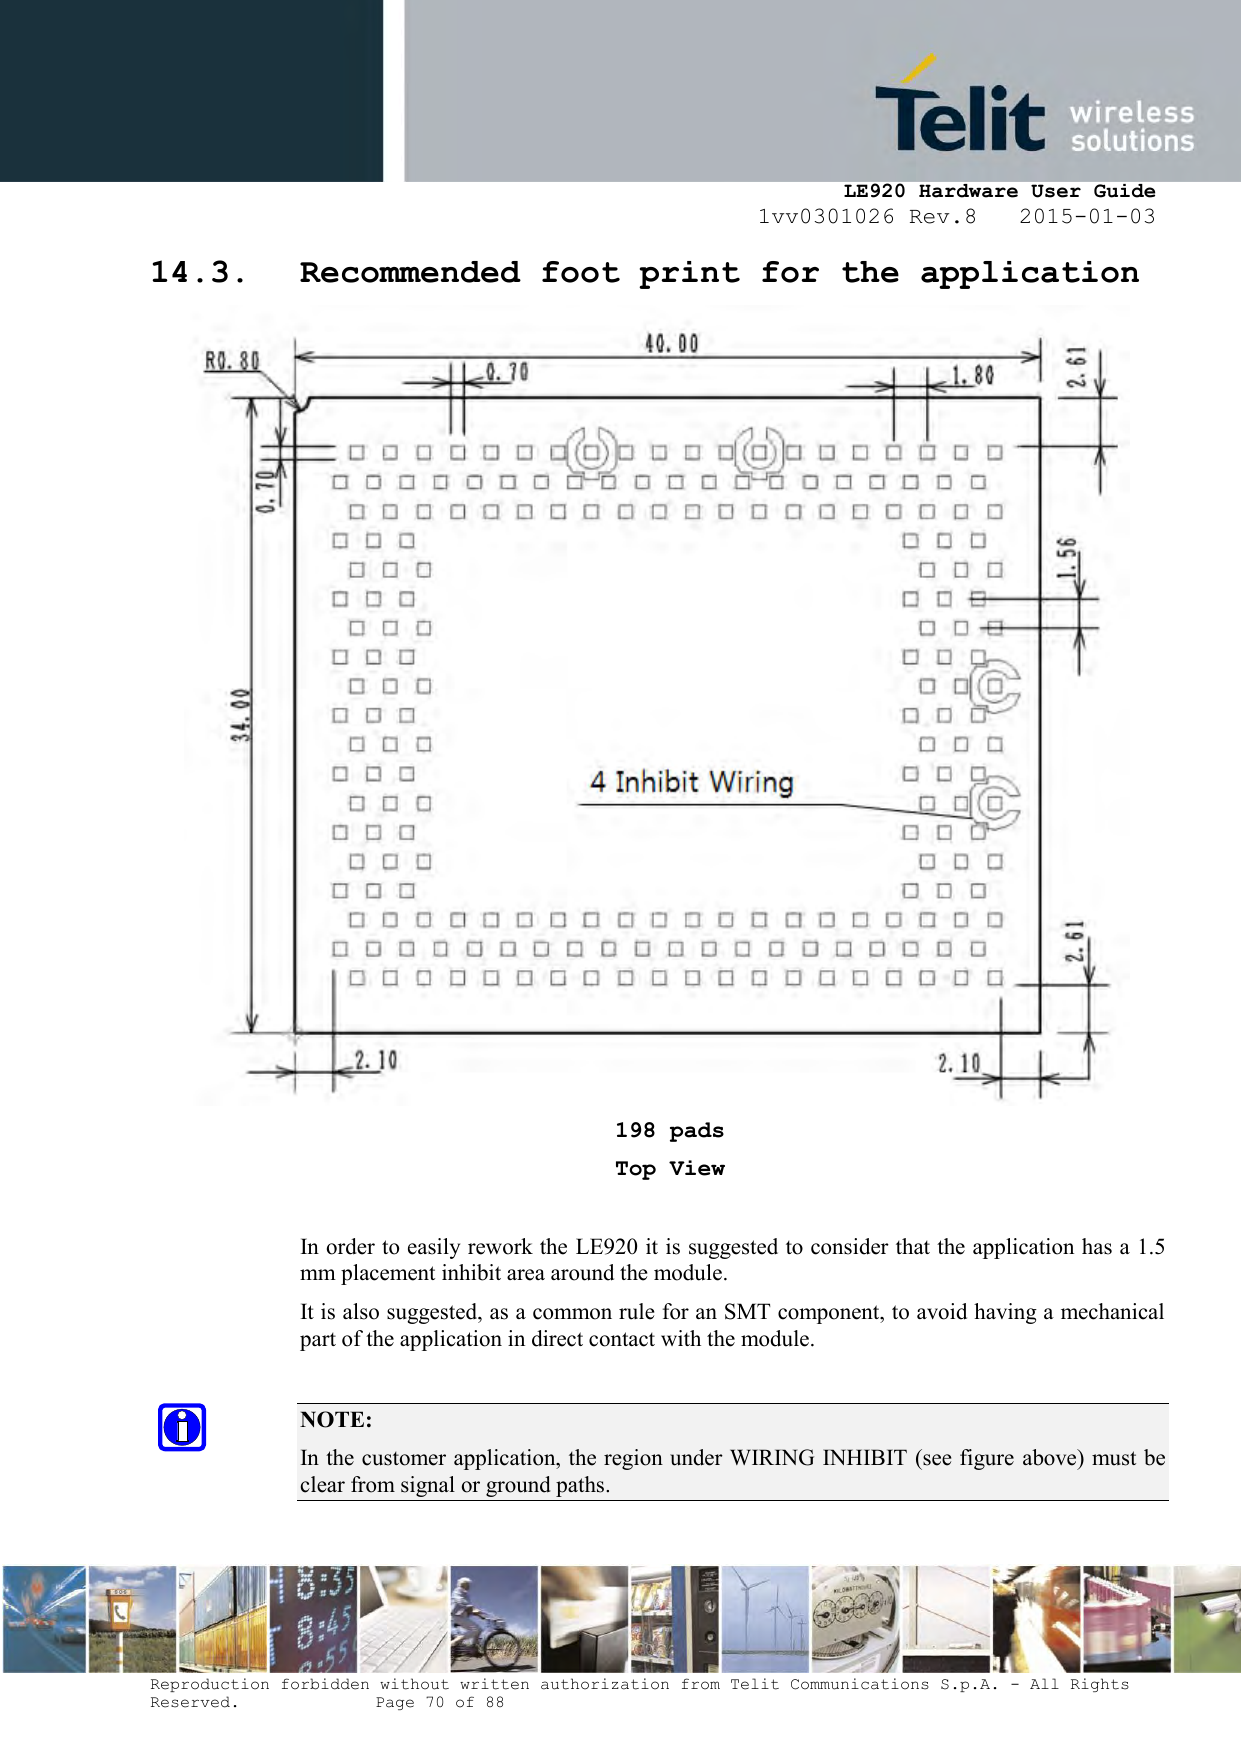     LE920 Hardware User Guide 1vv0301026 Rev.8   2015-01-03 Reproduction forbidden without written authorization from Telit Communications S.p.A. - All Rights Reserved.    Page 70 of 88  14.3. Recommended foot print for the application  198 pads Top View  In order to easily rework the LE920 it is suggested to consider that the application has a 1.5 mm placement inhibit area around the module.  It is also suggested, as a common rule for an SMT component, to avoid having a mechanical part of the application in direct contact with the module.  NOTE: In the customer application, the region under WIRING INHIBIT (see figure above) must be clear from signal or ground paths. 